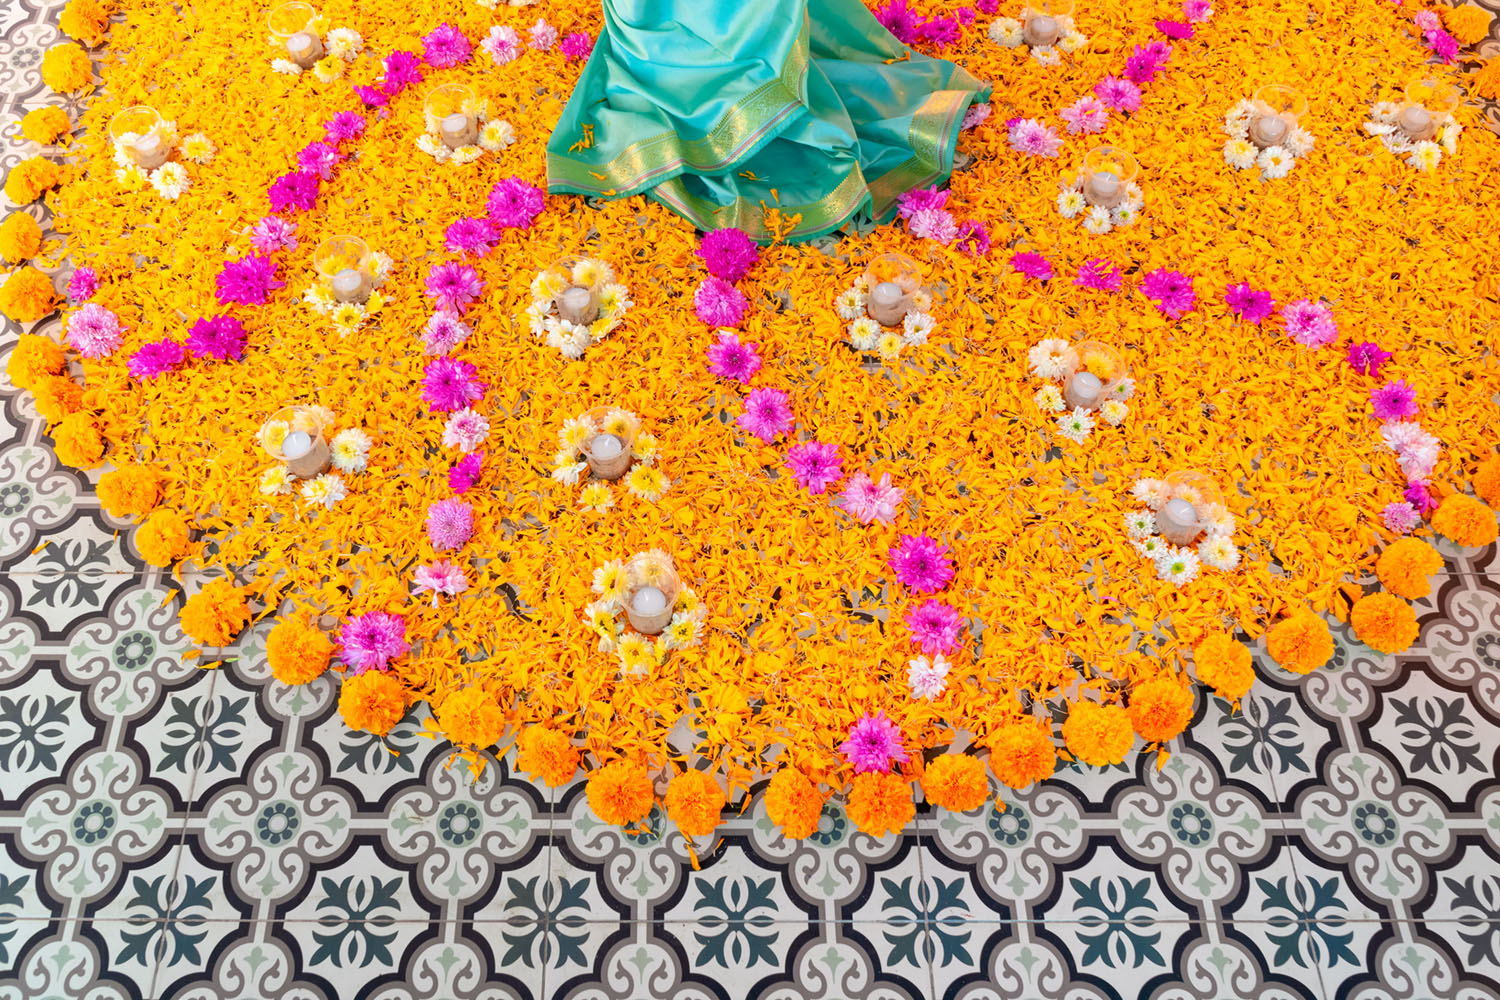 a vibrant circular, symmetrical design of orange marigold blooms and petals, accented with pink flowers, on an ornate tile floor